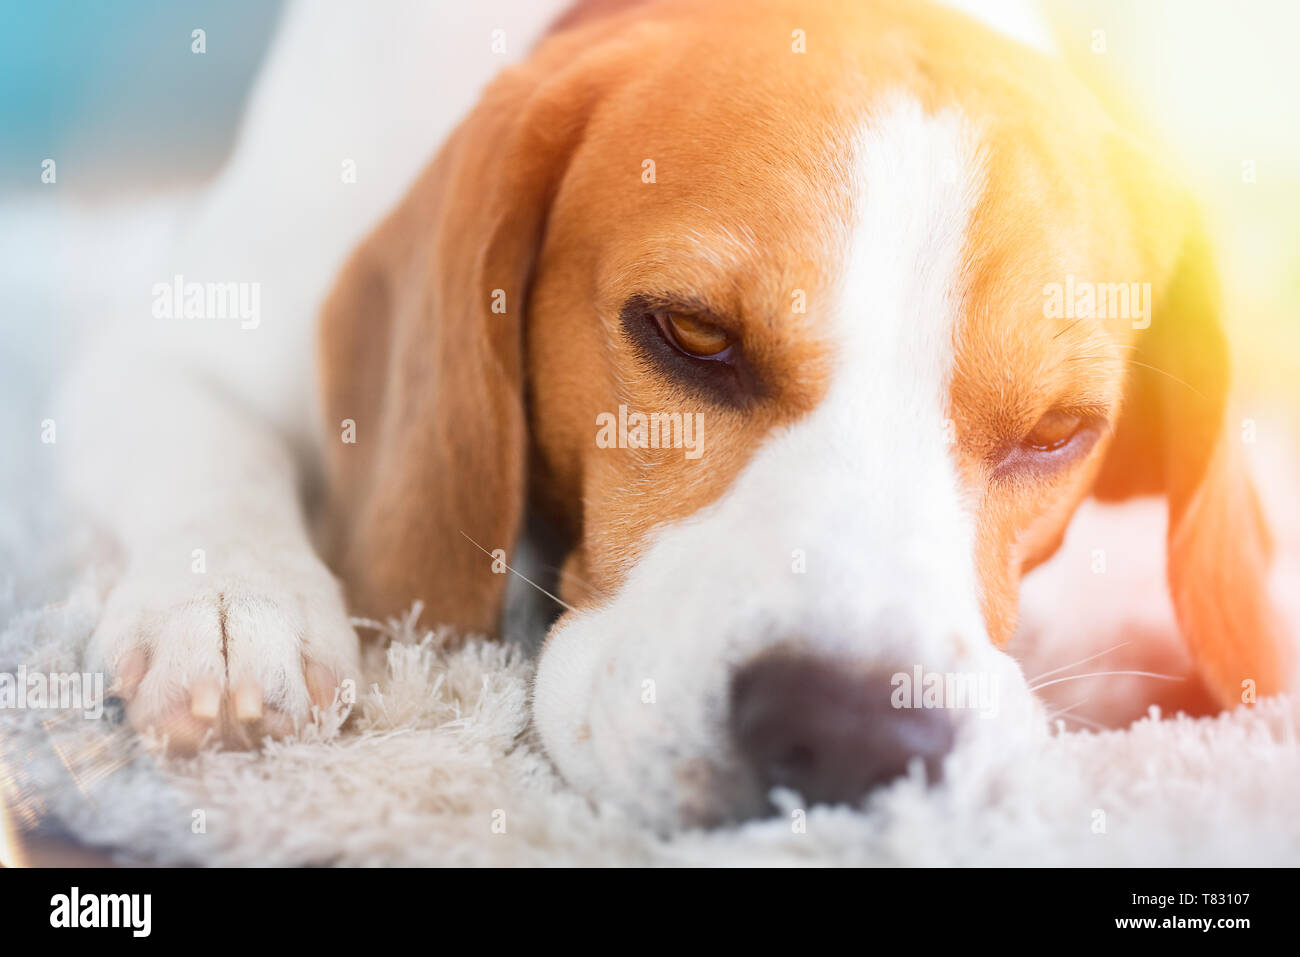 Beagle dog close up on a carpet falling asleep. Looking tired, depressed, sick concept Stock Photo